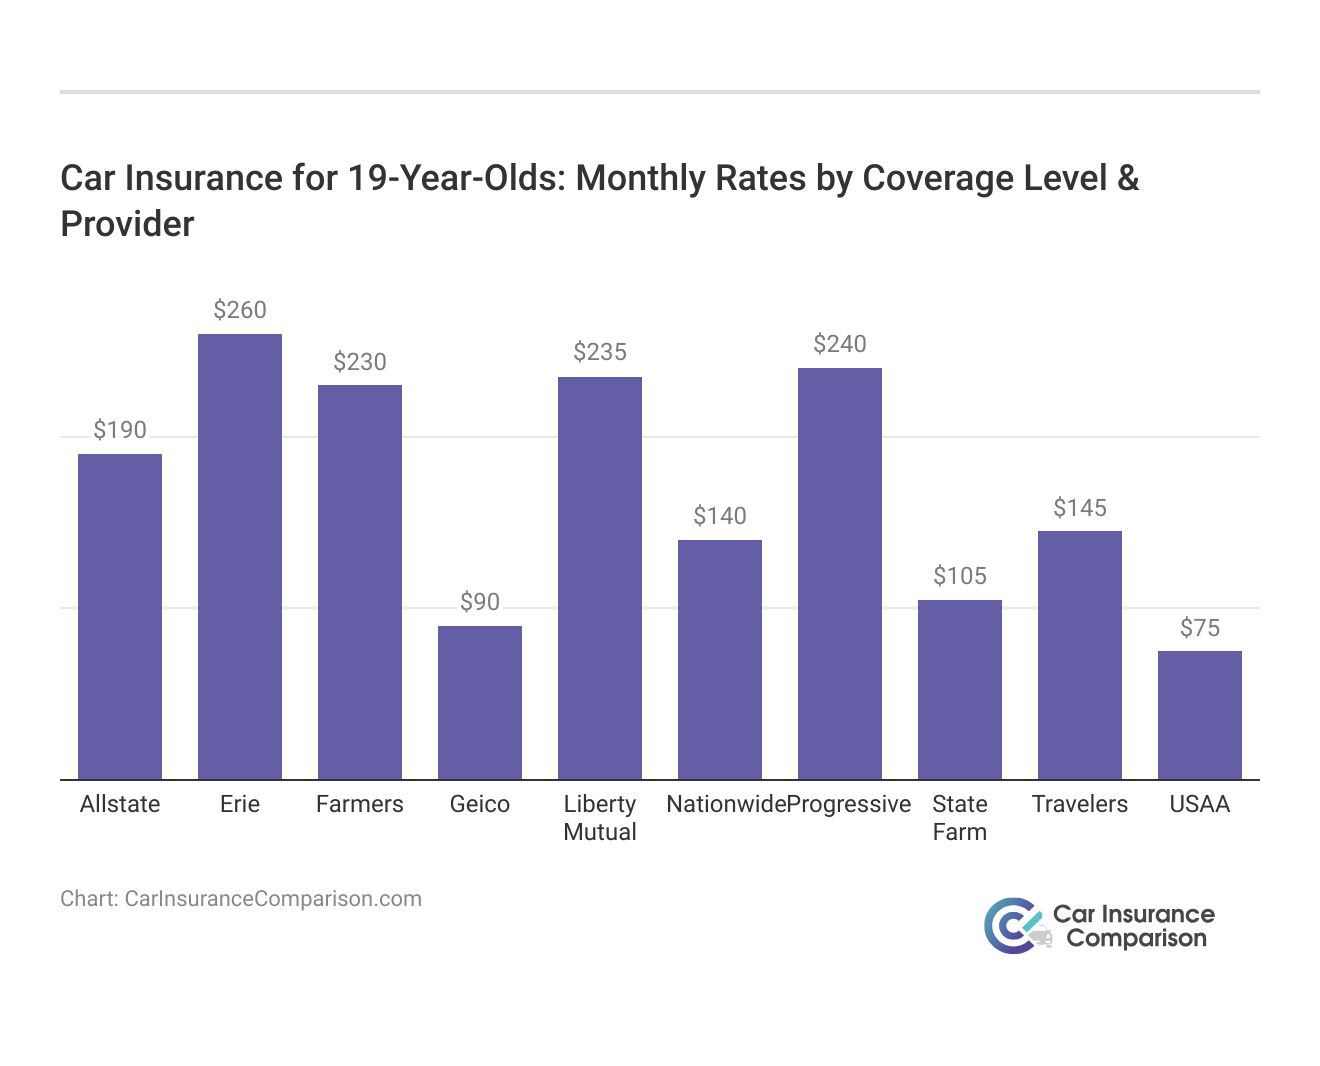 <h3>Car Insurance for 19-Year-Olds: Monthly Rates by Coverage Level & Provider</h3>